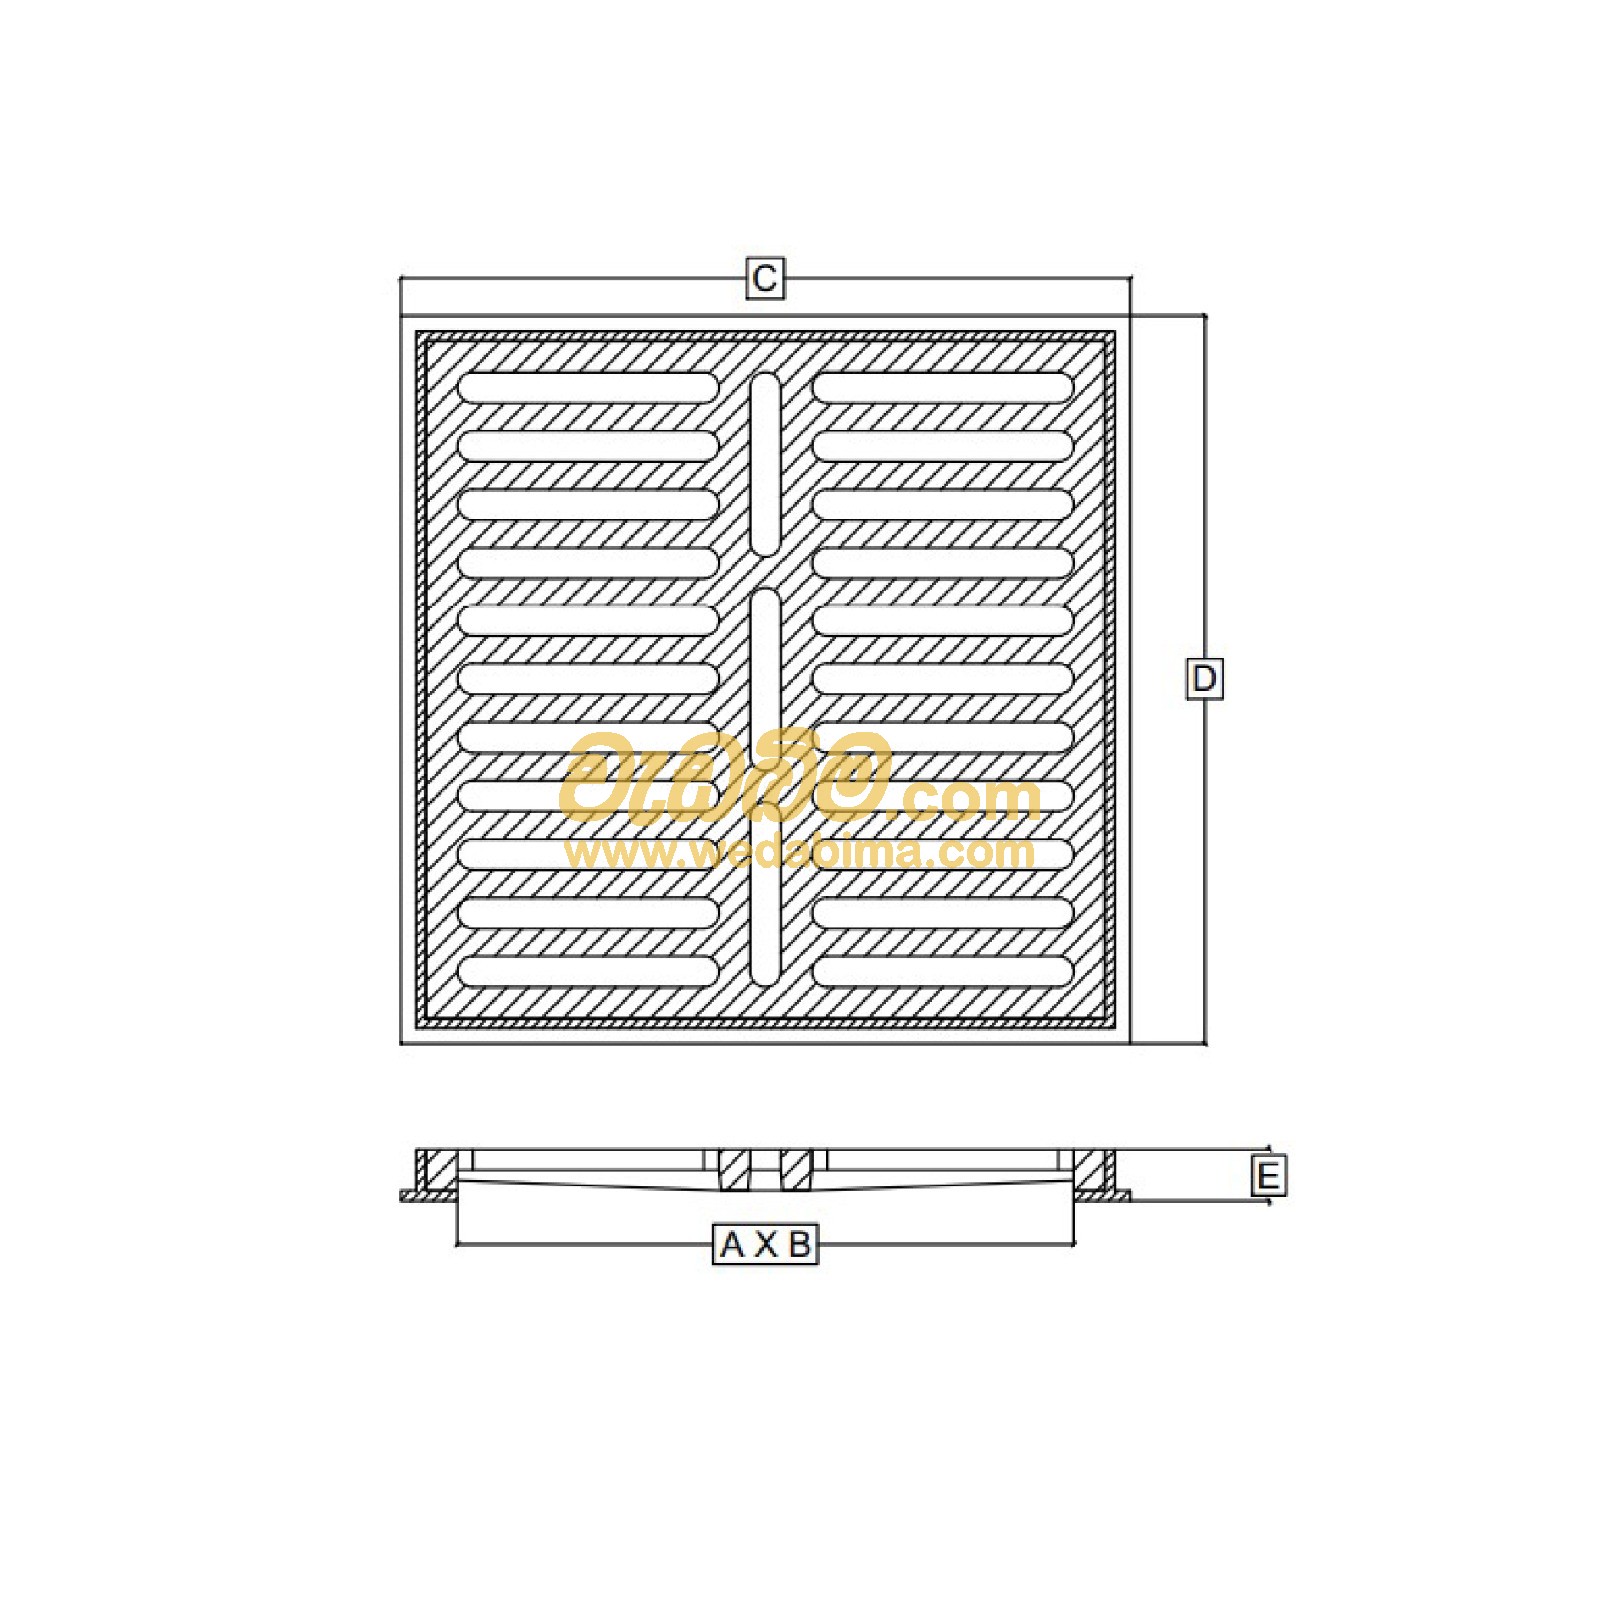 Cover image for 750mm x 750mm Cast-iron Grating cover